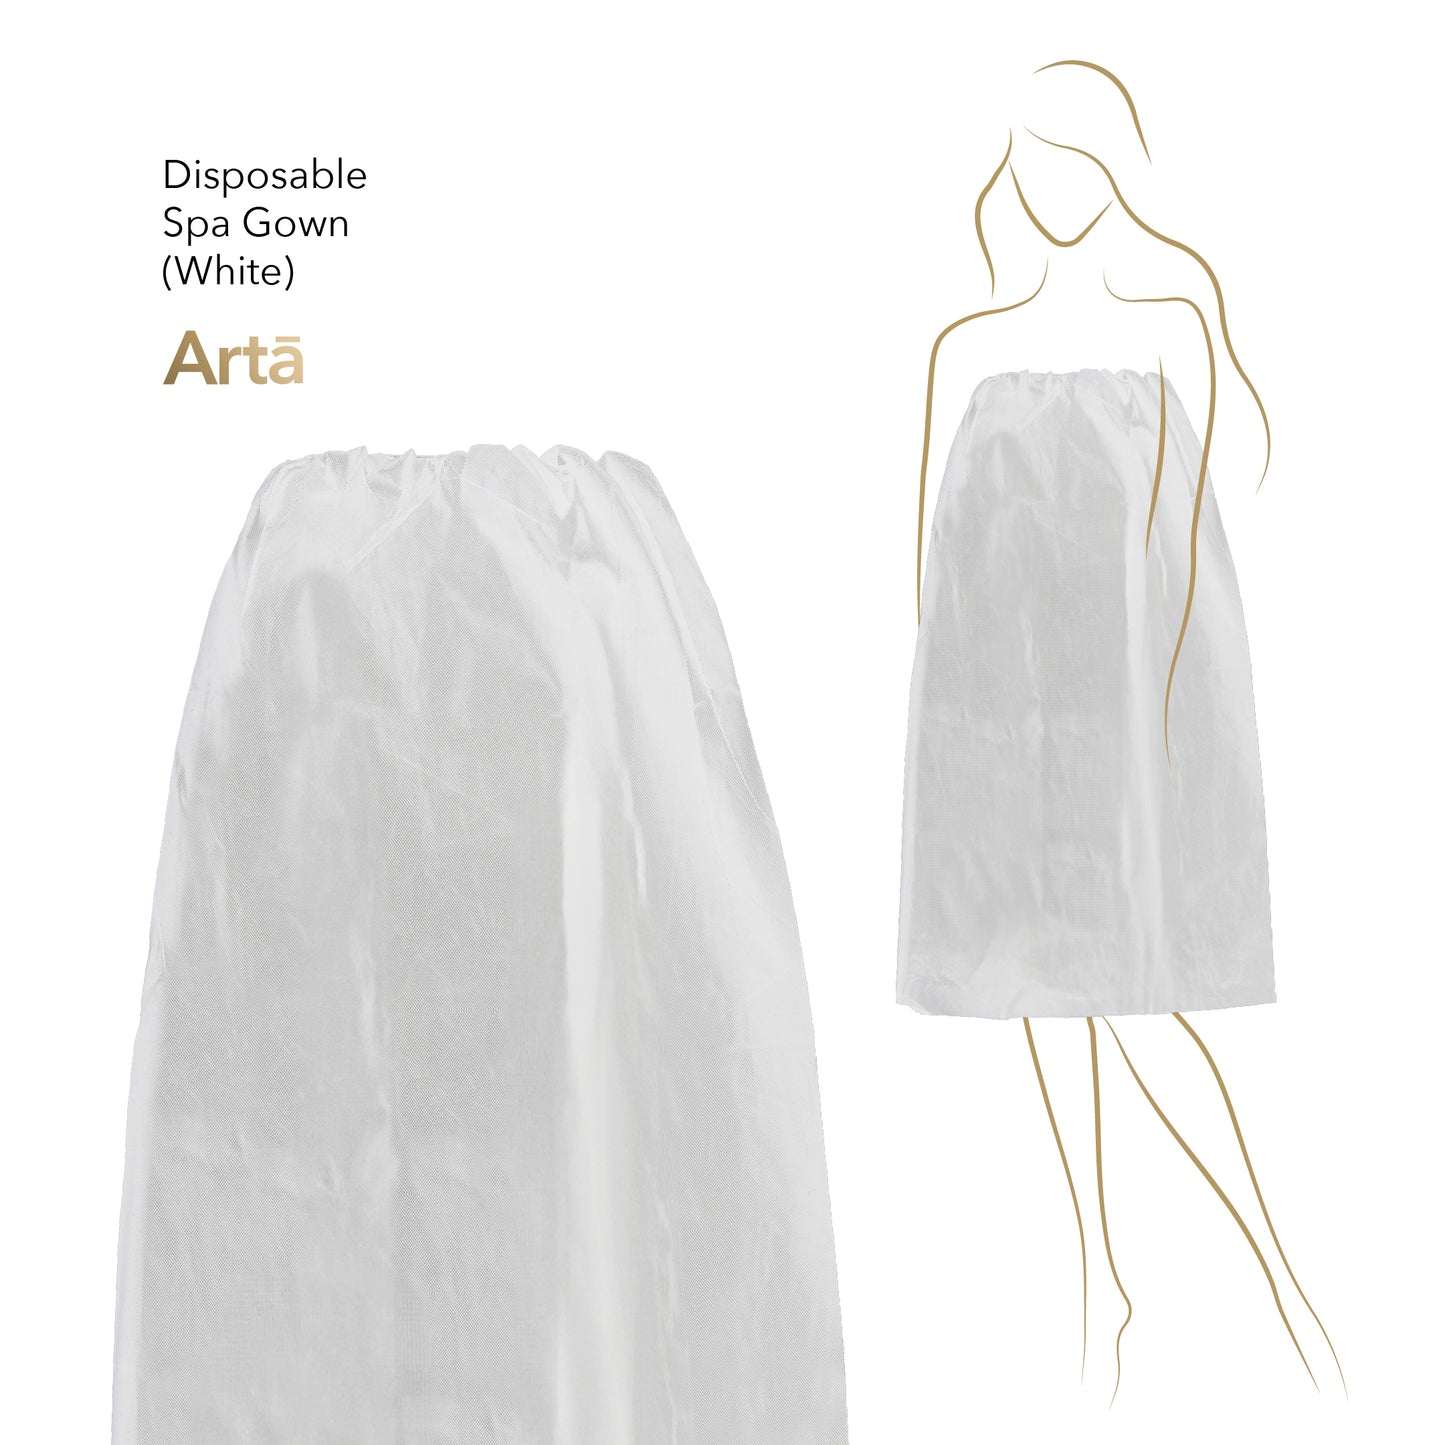 Disposable Spa Gown